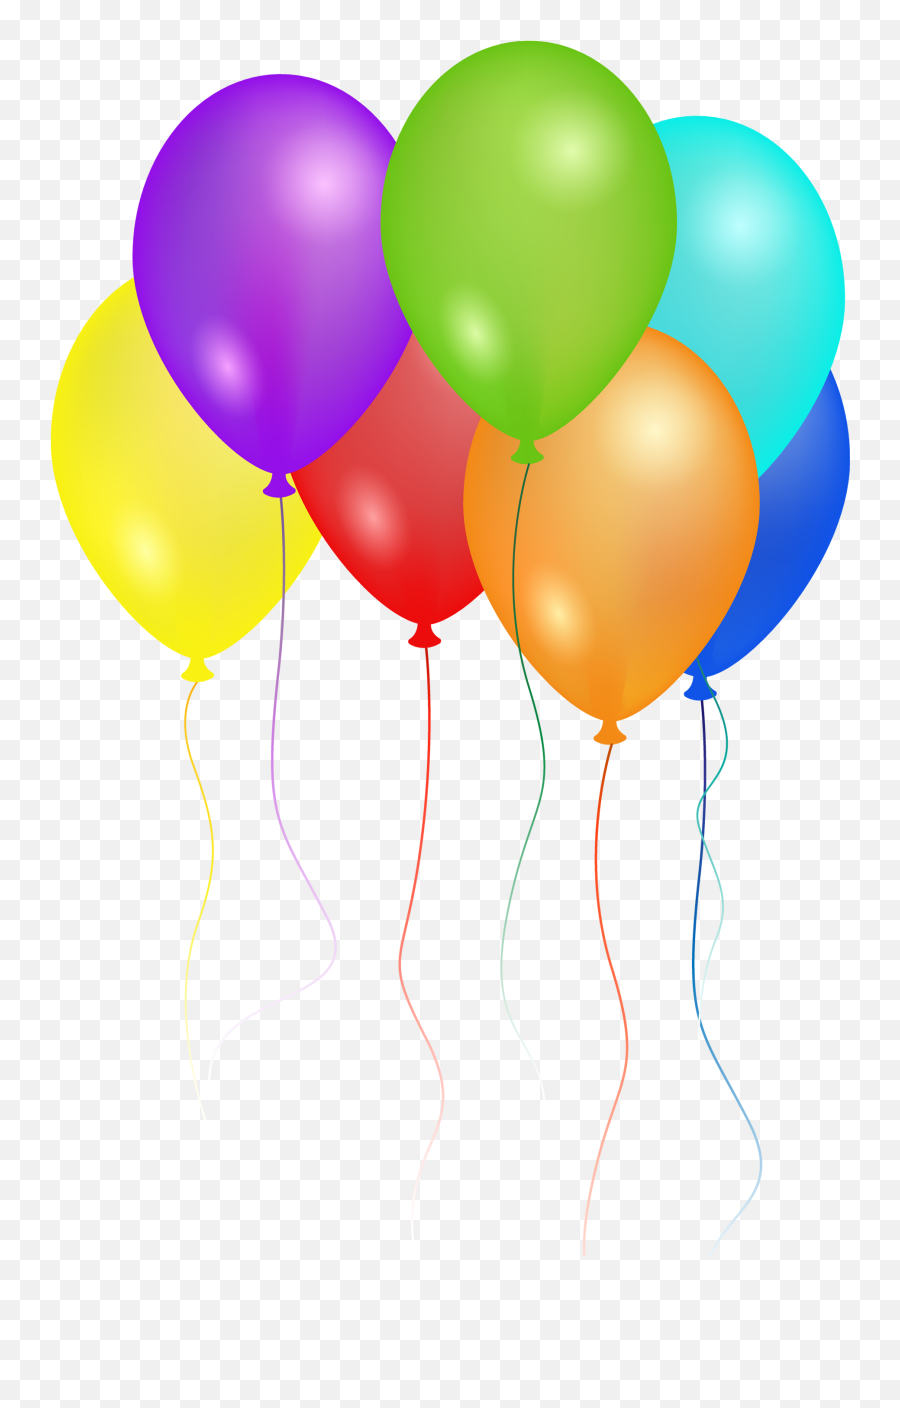 Balloons Free Png Transparent Image - Transparent Background Balloon Transparency Emoji,Free Transparent Background